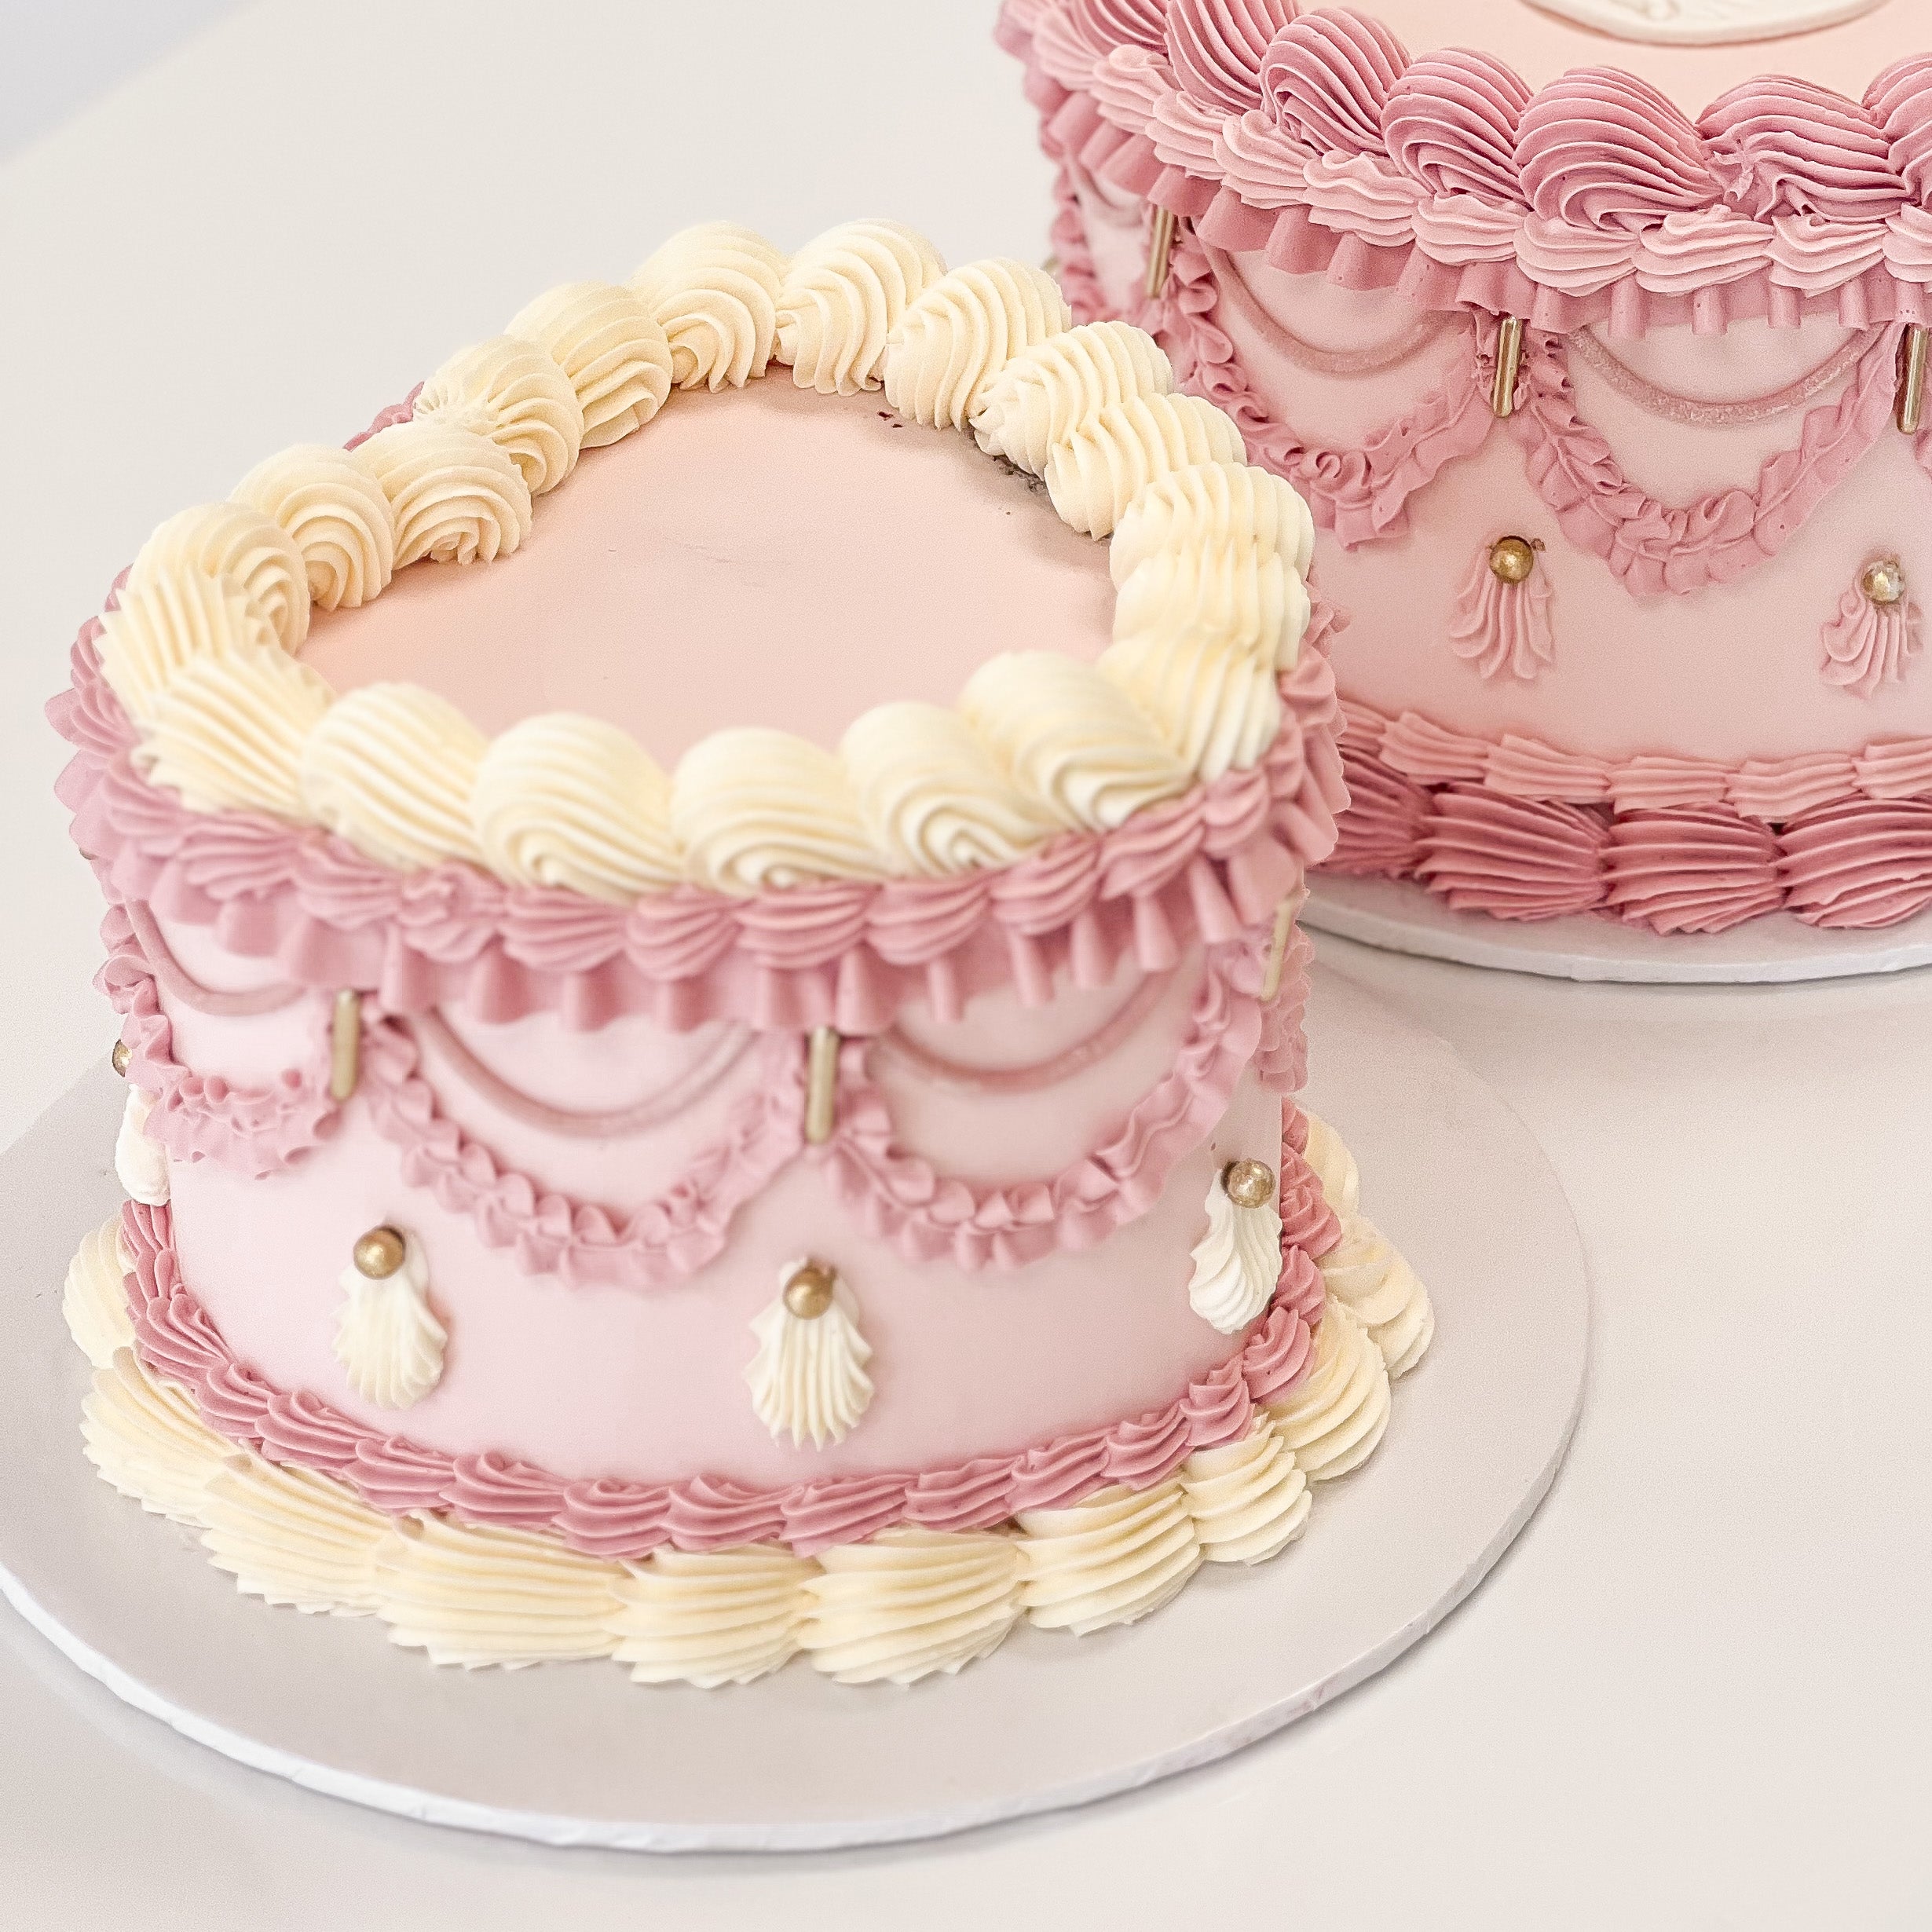 Heart Shaped Vintage Piped Cake